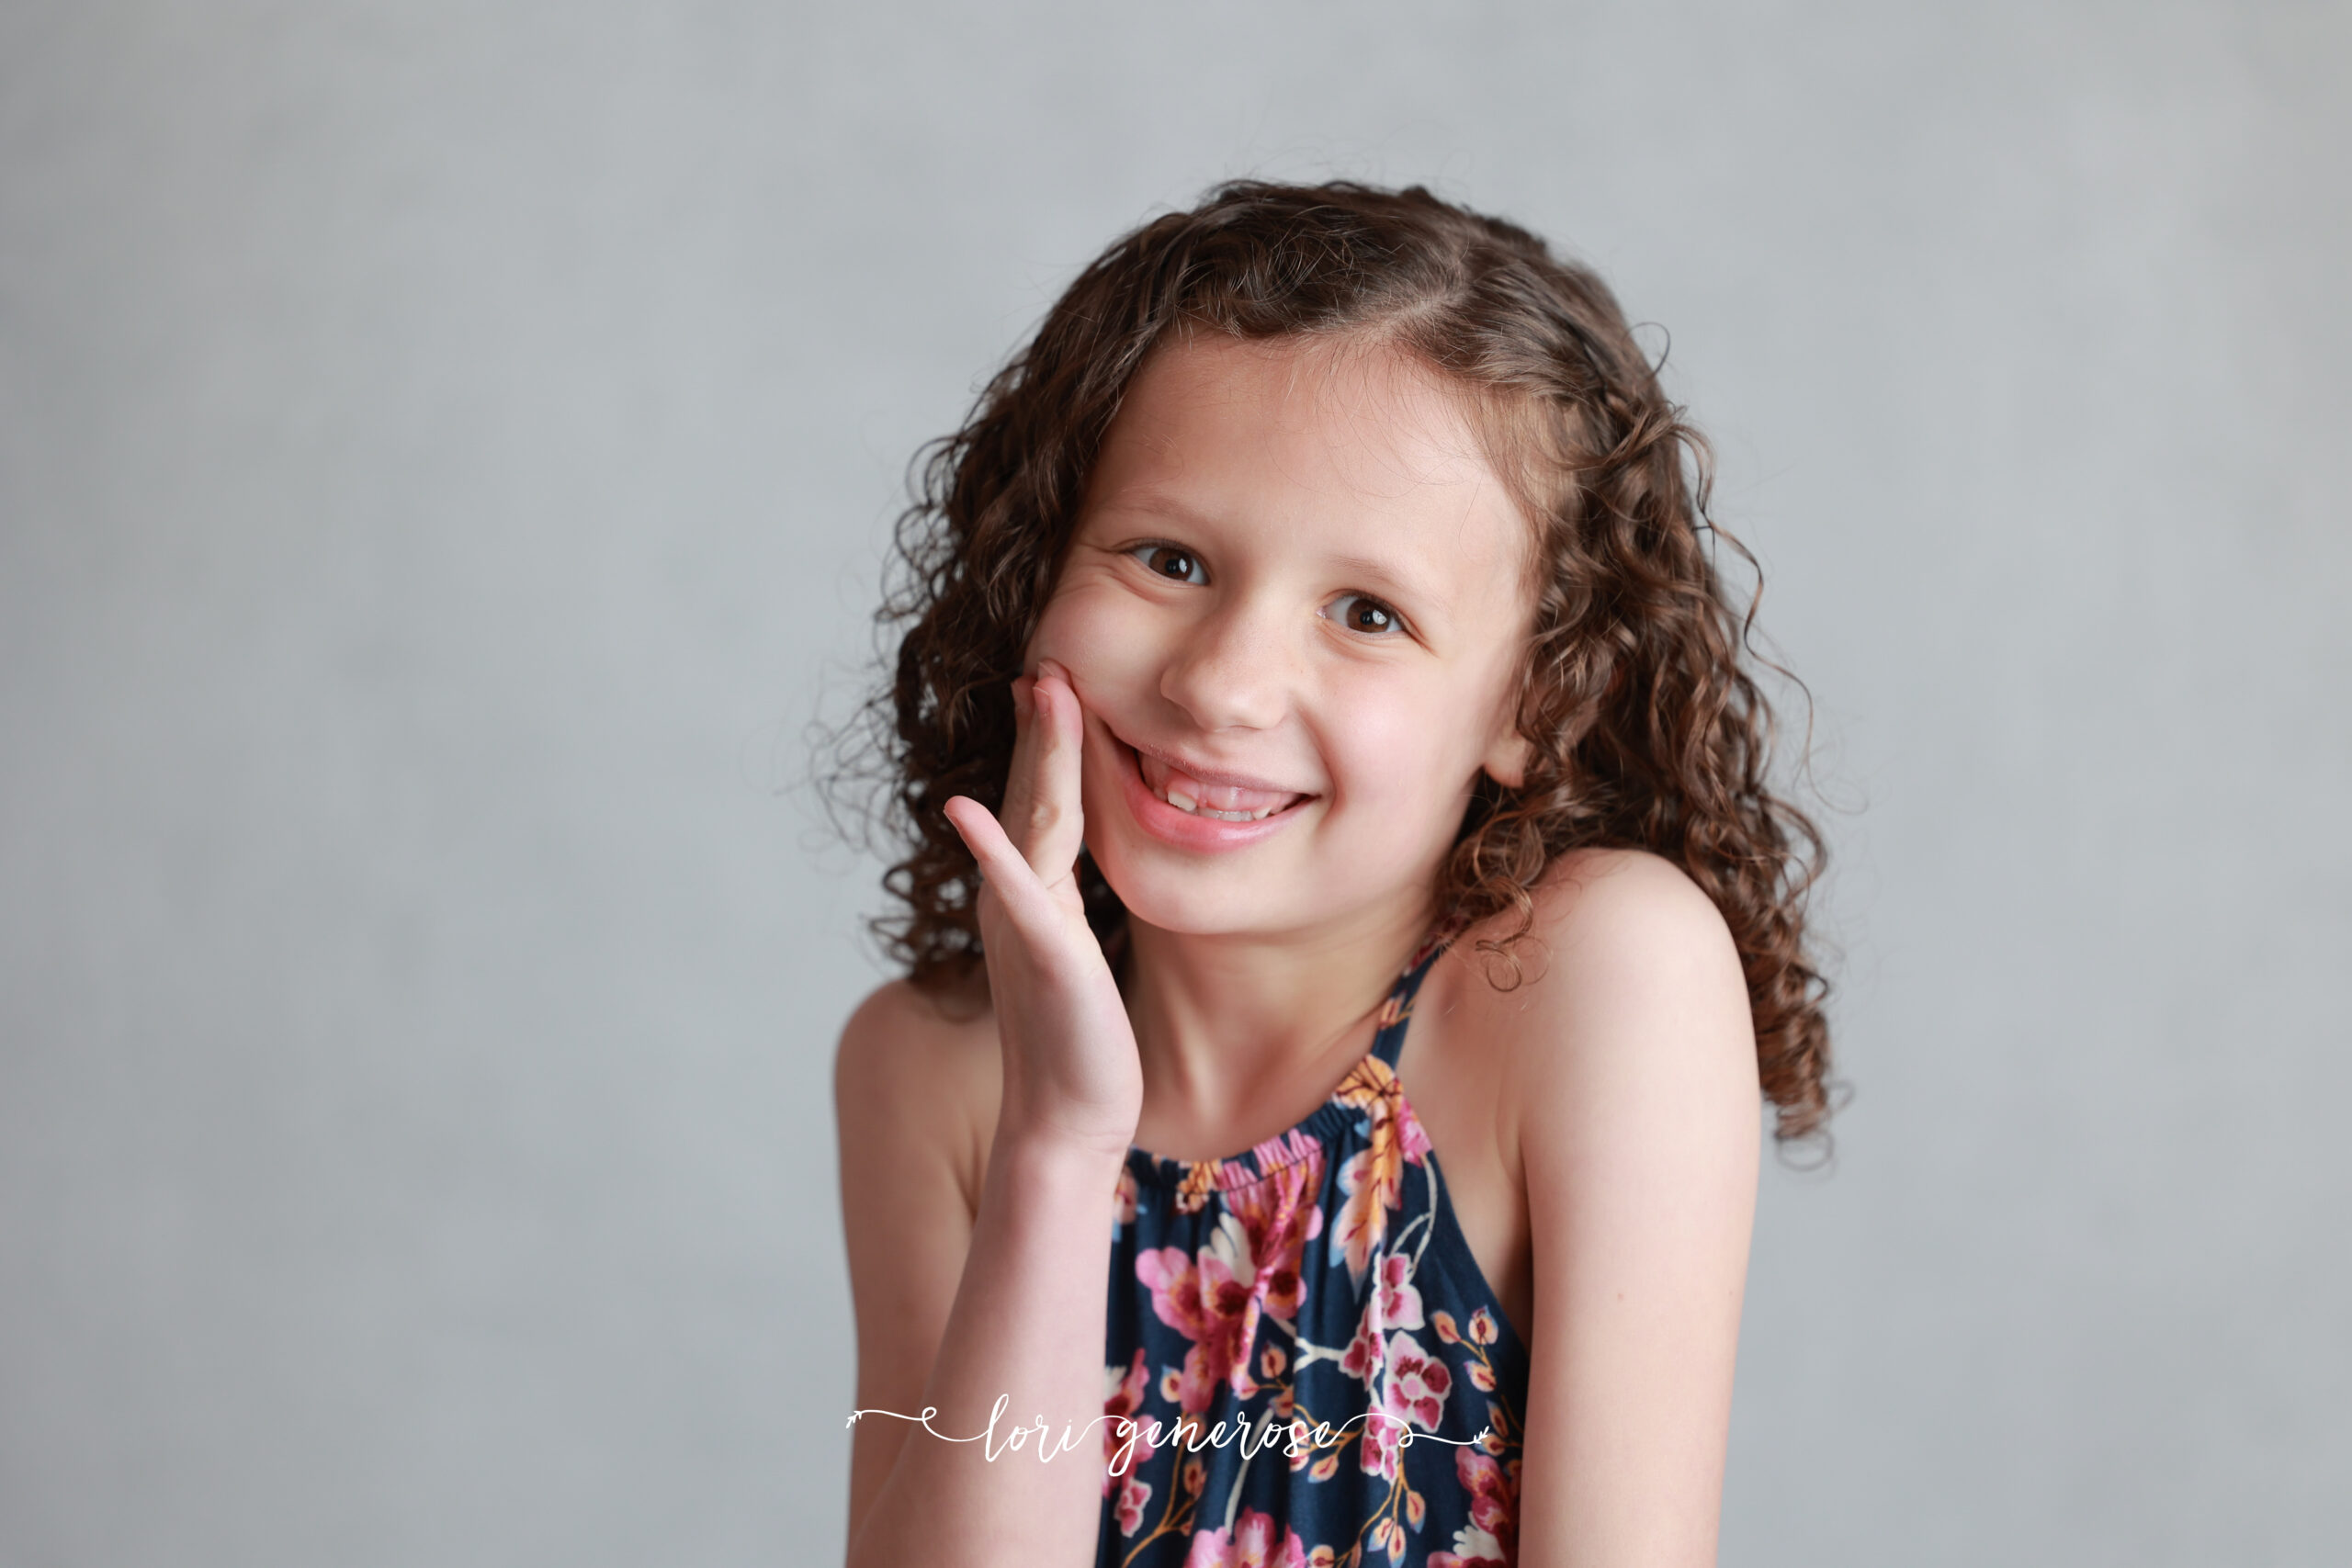 Lehigh Valley Photographer Lori Generose LG Photography How To Get Smiles From Kids Of All Ages At Photo Shoots